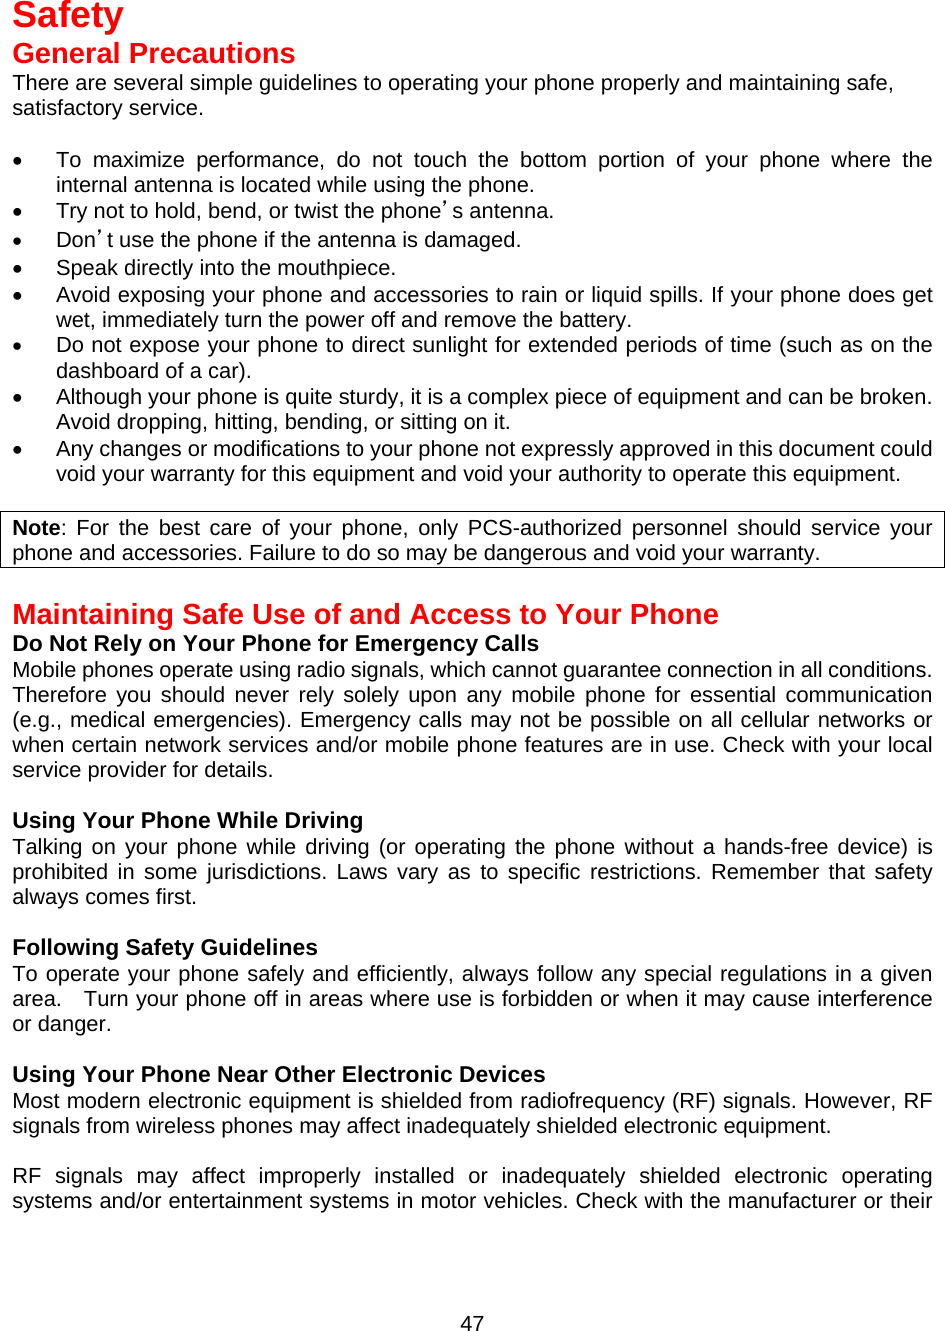   Safety General Precautions There are several simple guidelines to operating your phone properly and maintaining safe, satisfactory service.  •  To maximize performance, do not touch the bottom portion of your phone where the internal antenna is located while using the phone. •  Try not to hold, bend, or twist the phone’s antenna. •  Don’t use the phone if the antenna is damaged. •  Speak directly into the mouthpiece. •  Avoid exposing your phone and accessories to rain or liquid spills. If your phone does get wet, immediately turn the power off and remove the battery. •  Do not expose your phone to direct sunlight for extended periods of time (such as on the dashboard of a car). •  Although your phone is quite sturdy, it is a complex piece of equipment and can be broken. Avoid dropping, hitting, bending, or sitting on it. •  Any changes or modifications to your phone not expressly approved in this document could void your warranty for this equipment and void your authority to operate this equipment.  Note: For the best care of your phone, only PCS-authorized personnel should service your phone and accessories. Failure to do so may be dangerous and void your warranty.  Maintaining Safe Use of and Access to Your Phone Do Not Rely on Your Phone for Emergency Calls Mobile phones operate using radio signals, which cannot guarantee connection in all conditions.   Therefore you should never rely solely upon any mobile phone for essential communication (e.g., medical emergencies). Emergency calls may not be possible on all cellular networks or when certain network services and/or mobile phone features are in use. Check with your local service provider for details.  Using Your Phone While Driving Talking on your phone while driving (or operating the phone without a hands-free device) is prohibited in some jurisdictions. Laws vary as to specific restrictions. Remember that safety always comes first.  Following Safety Guidelines To operate your phone safely and efficiently, always follow any special regulations in a given area.    Turn your phone off in areas where use is forbidden or when it may cause interference or danger.  Using Your Phone Near Other Electronic Devices Most modern electronic equipment is shielded from radiofrequency (RF) signals. However, RF signals from wireless phones may affect inadequately shielded electronic equipment.    RF signals may affect improperly installed or inadequately shielded electronic operating systems and/or entertainment systems in motor vehicles. Check with the manufacturer or their  47